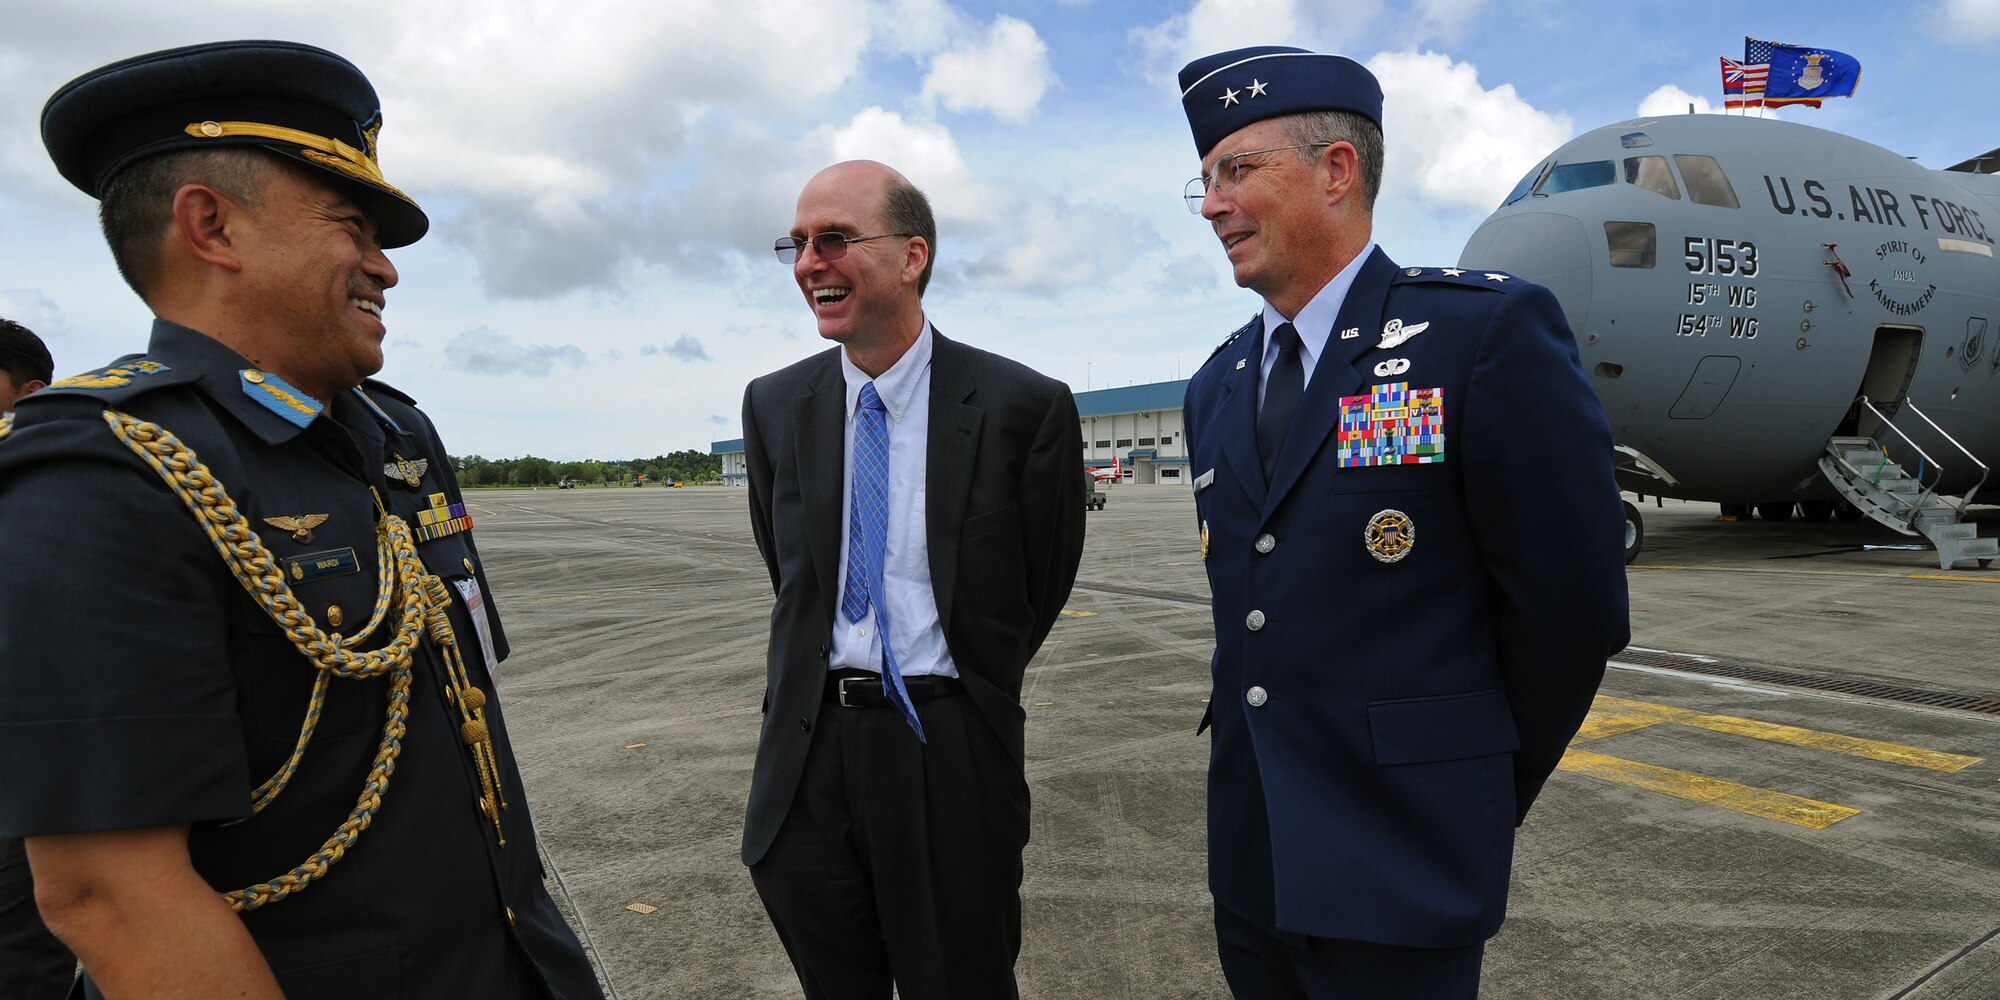 Brig. Gen. (U) Haji Wardi bin Haji Abdul Latip, the commander of the Royal Brunei Air Force, left, U.S. Ambassador to Brunei Daniel L. Shields, center, and Maj. Gen. Paul H. McGillicuddy, Pacific Air Forces chief of staff, right, share a moment as they patiently await the arrival of His Majesty Sultan Haji Hassanal Bolkiahsutan of Brunei at Rimba Air Base during the 4th biennial Brunei Darussalam International Defense Exhibition, Dec. 3, 2013. JBPPH personnel will be showcasing the C-17 Globemaster III through static displays and aerial demonstrations during BRIDEX. The exhibition is an opportunity for networking and sharing technology with regional partners and allies, building strong multilateral relationships, increased cooperation and enhanced preparedness for disasters and other contingency operations. (U.S. Air Force photo/Master Sgt. Jerome S. Tayborn)